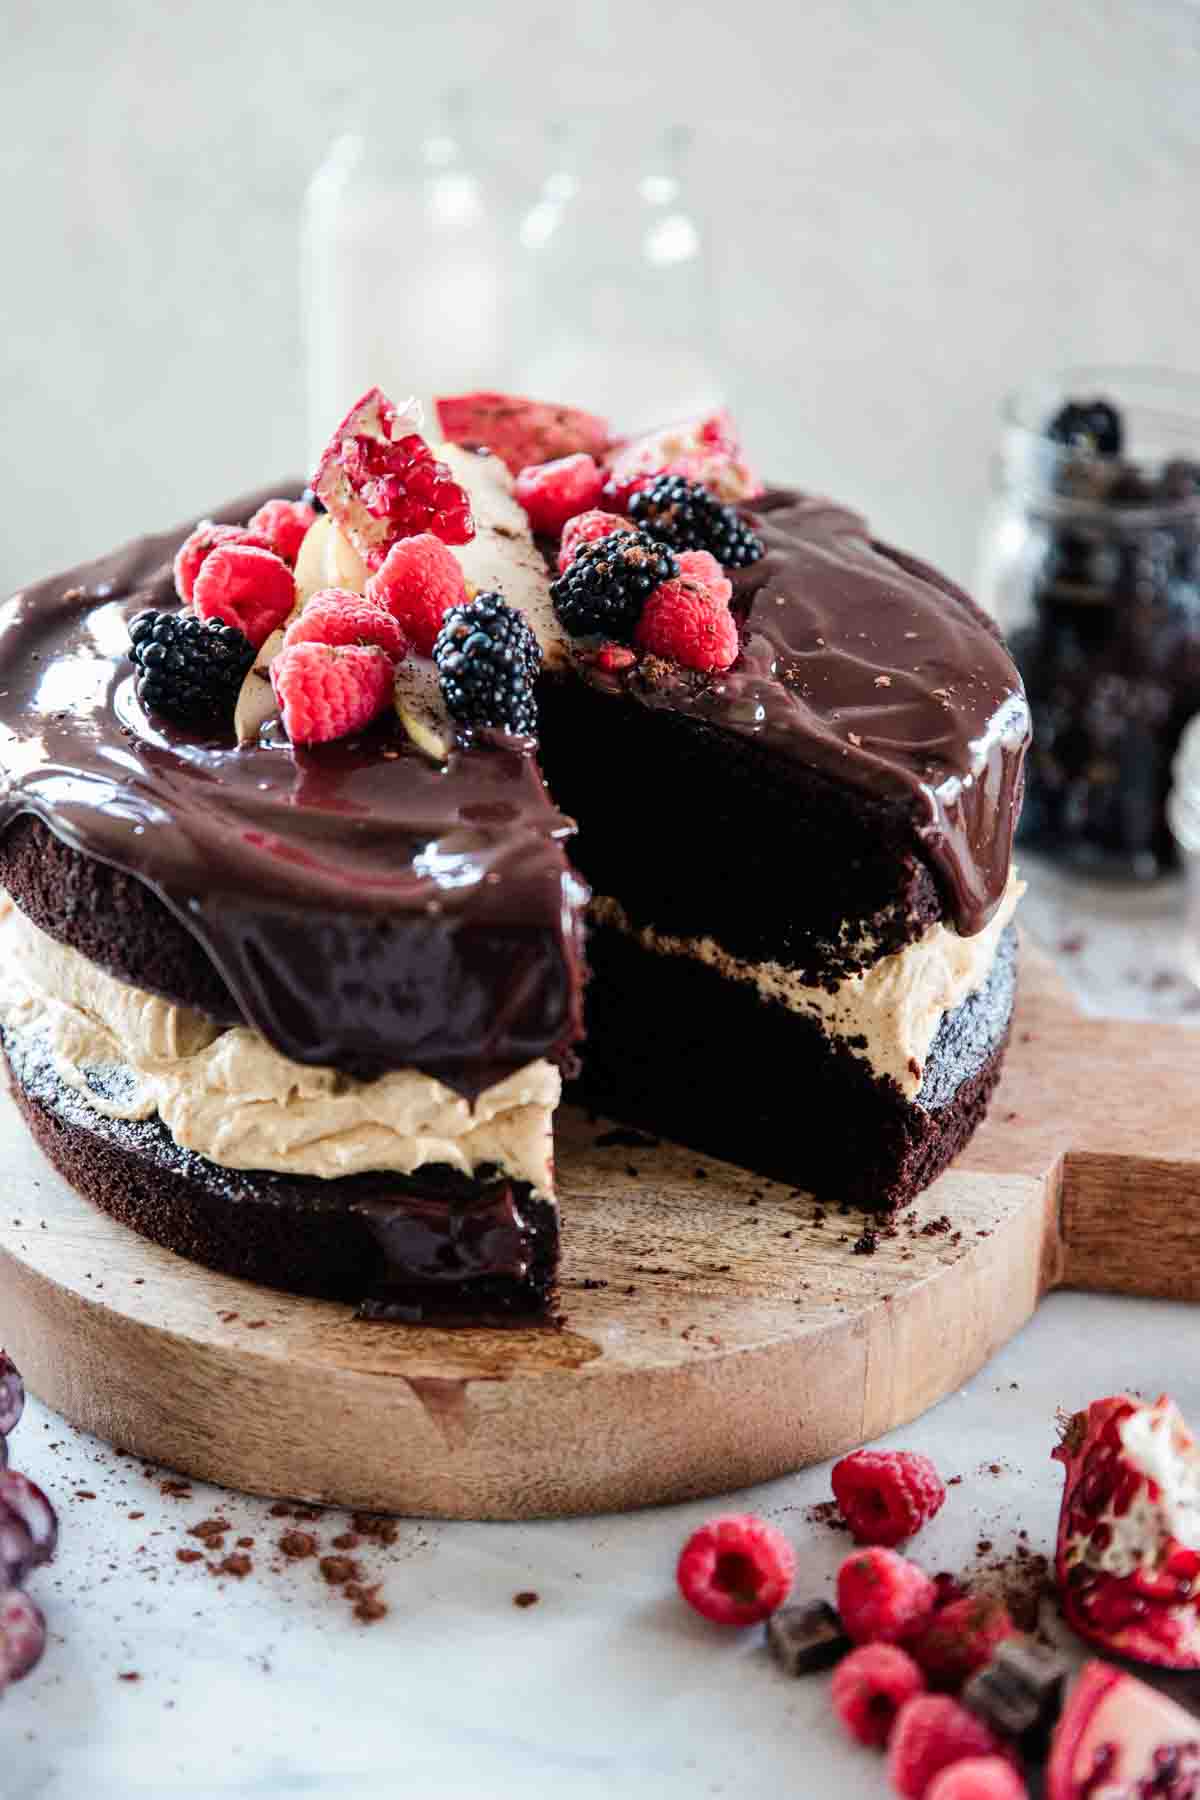 Chocolate pumpkin cake with a slice removed. The cake is garnished with fresh fruit.